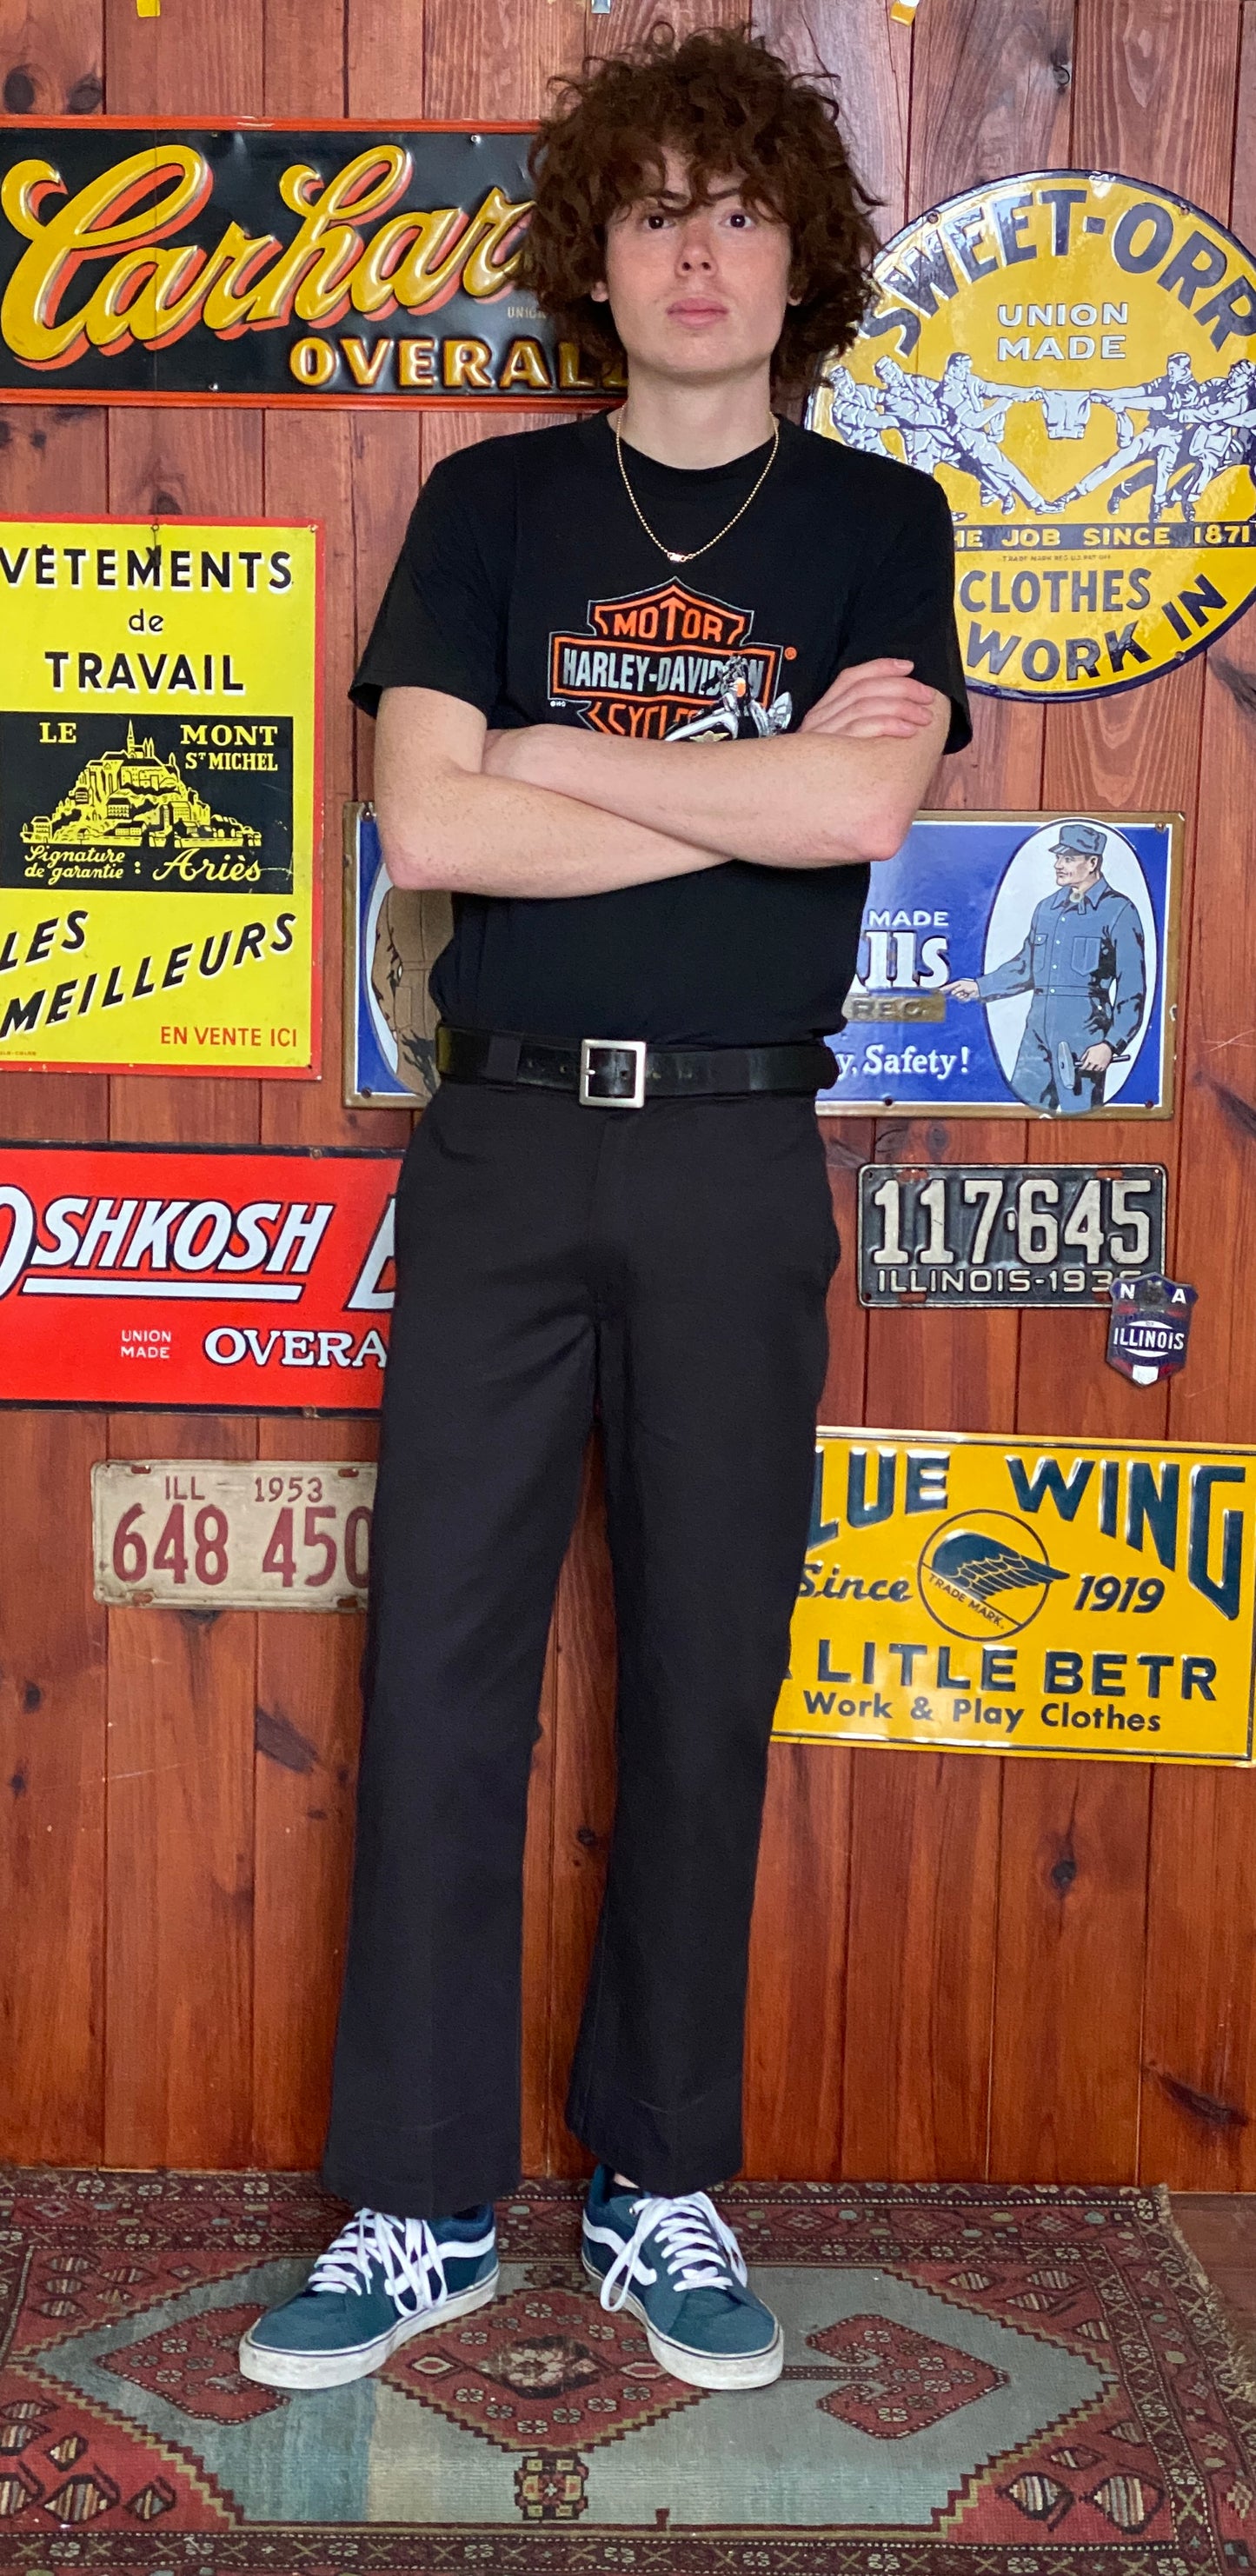 Person wearing black work pants with a visible dickies brand logo.